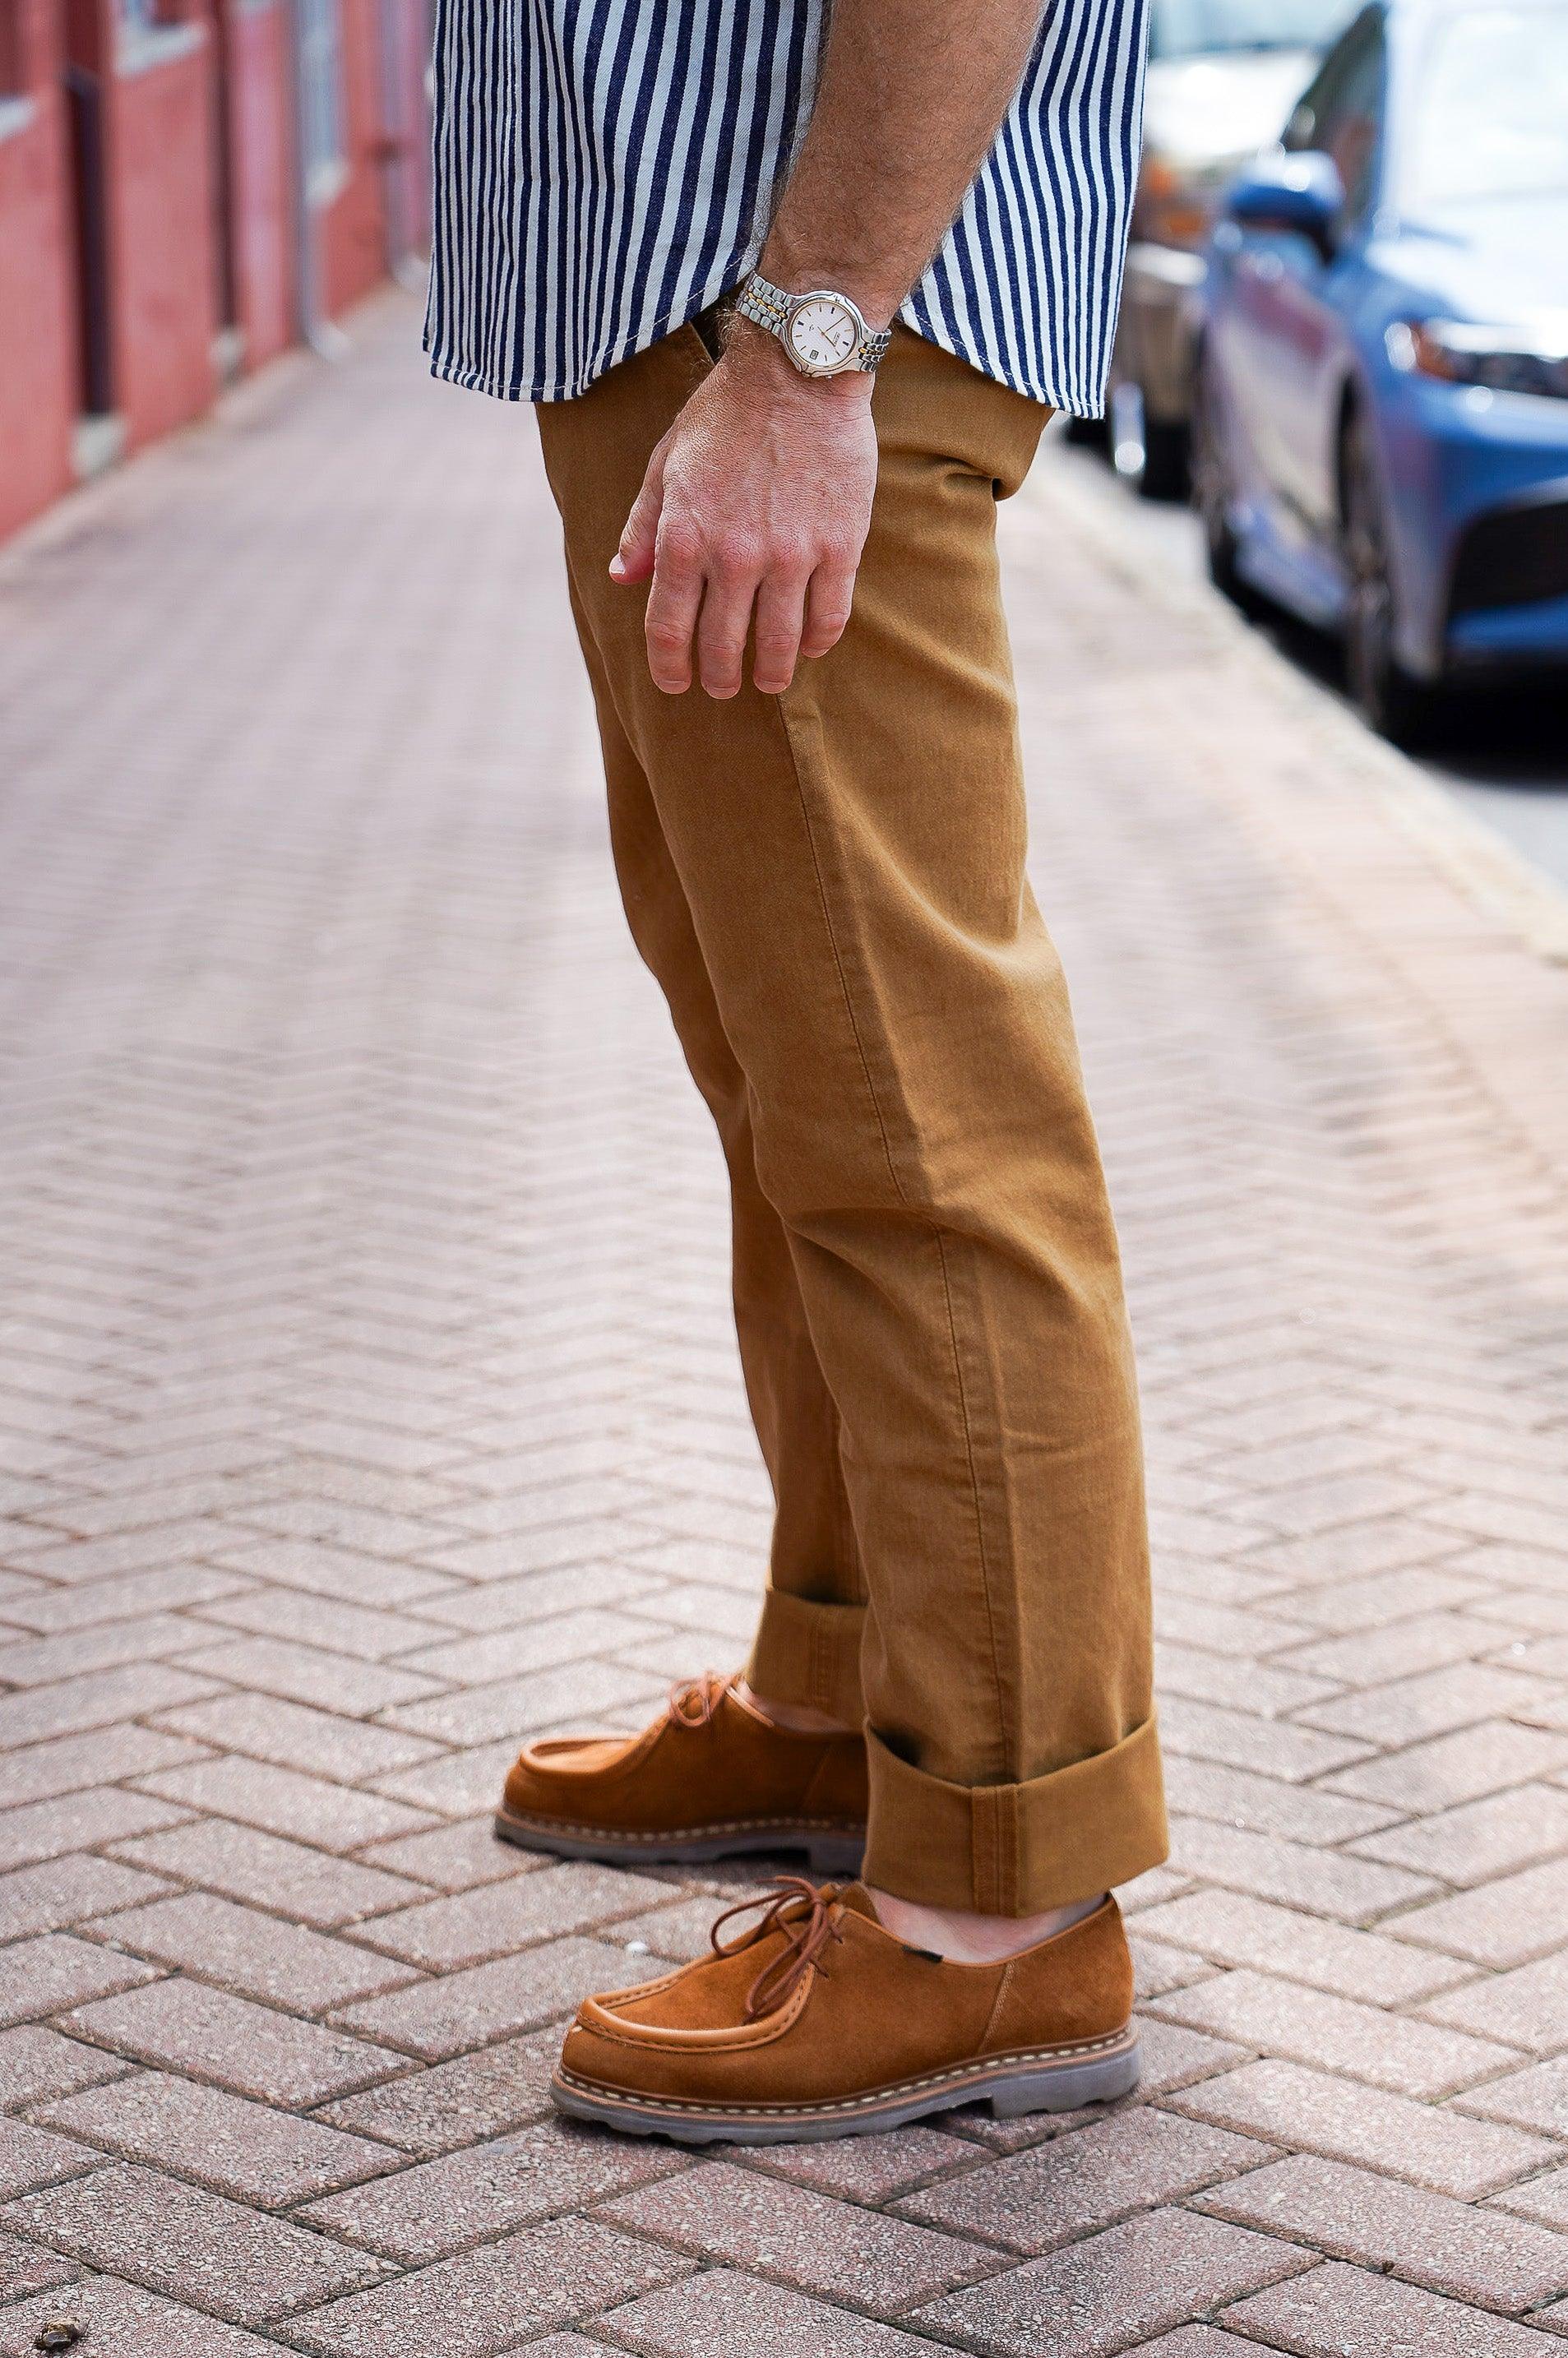 Deck Pant Straight Fit - Tan - Guilty Party